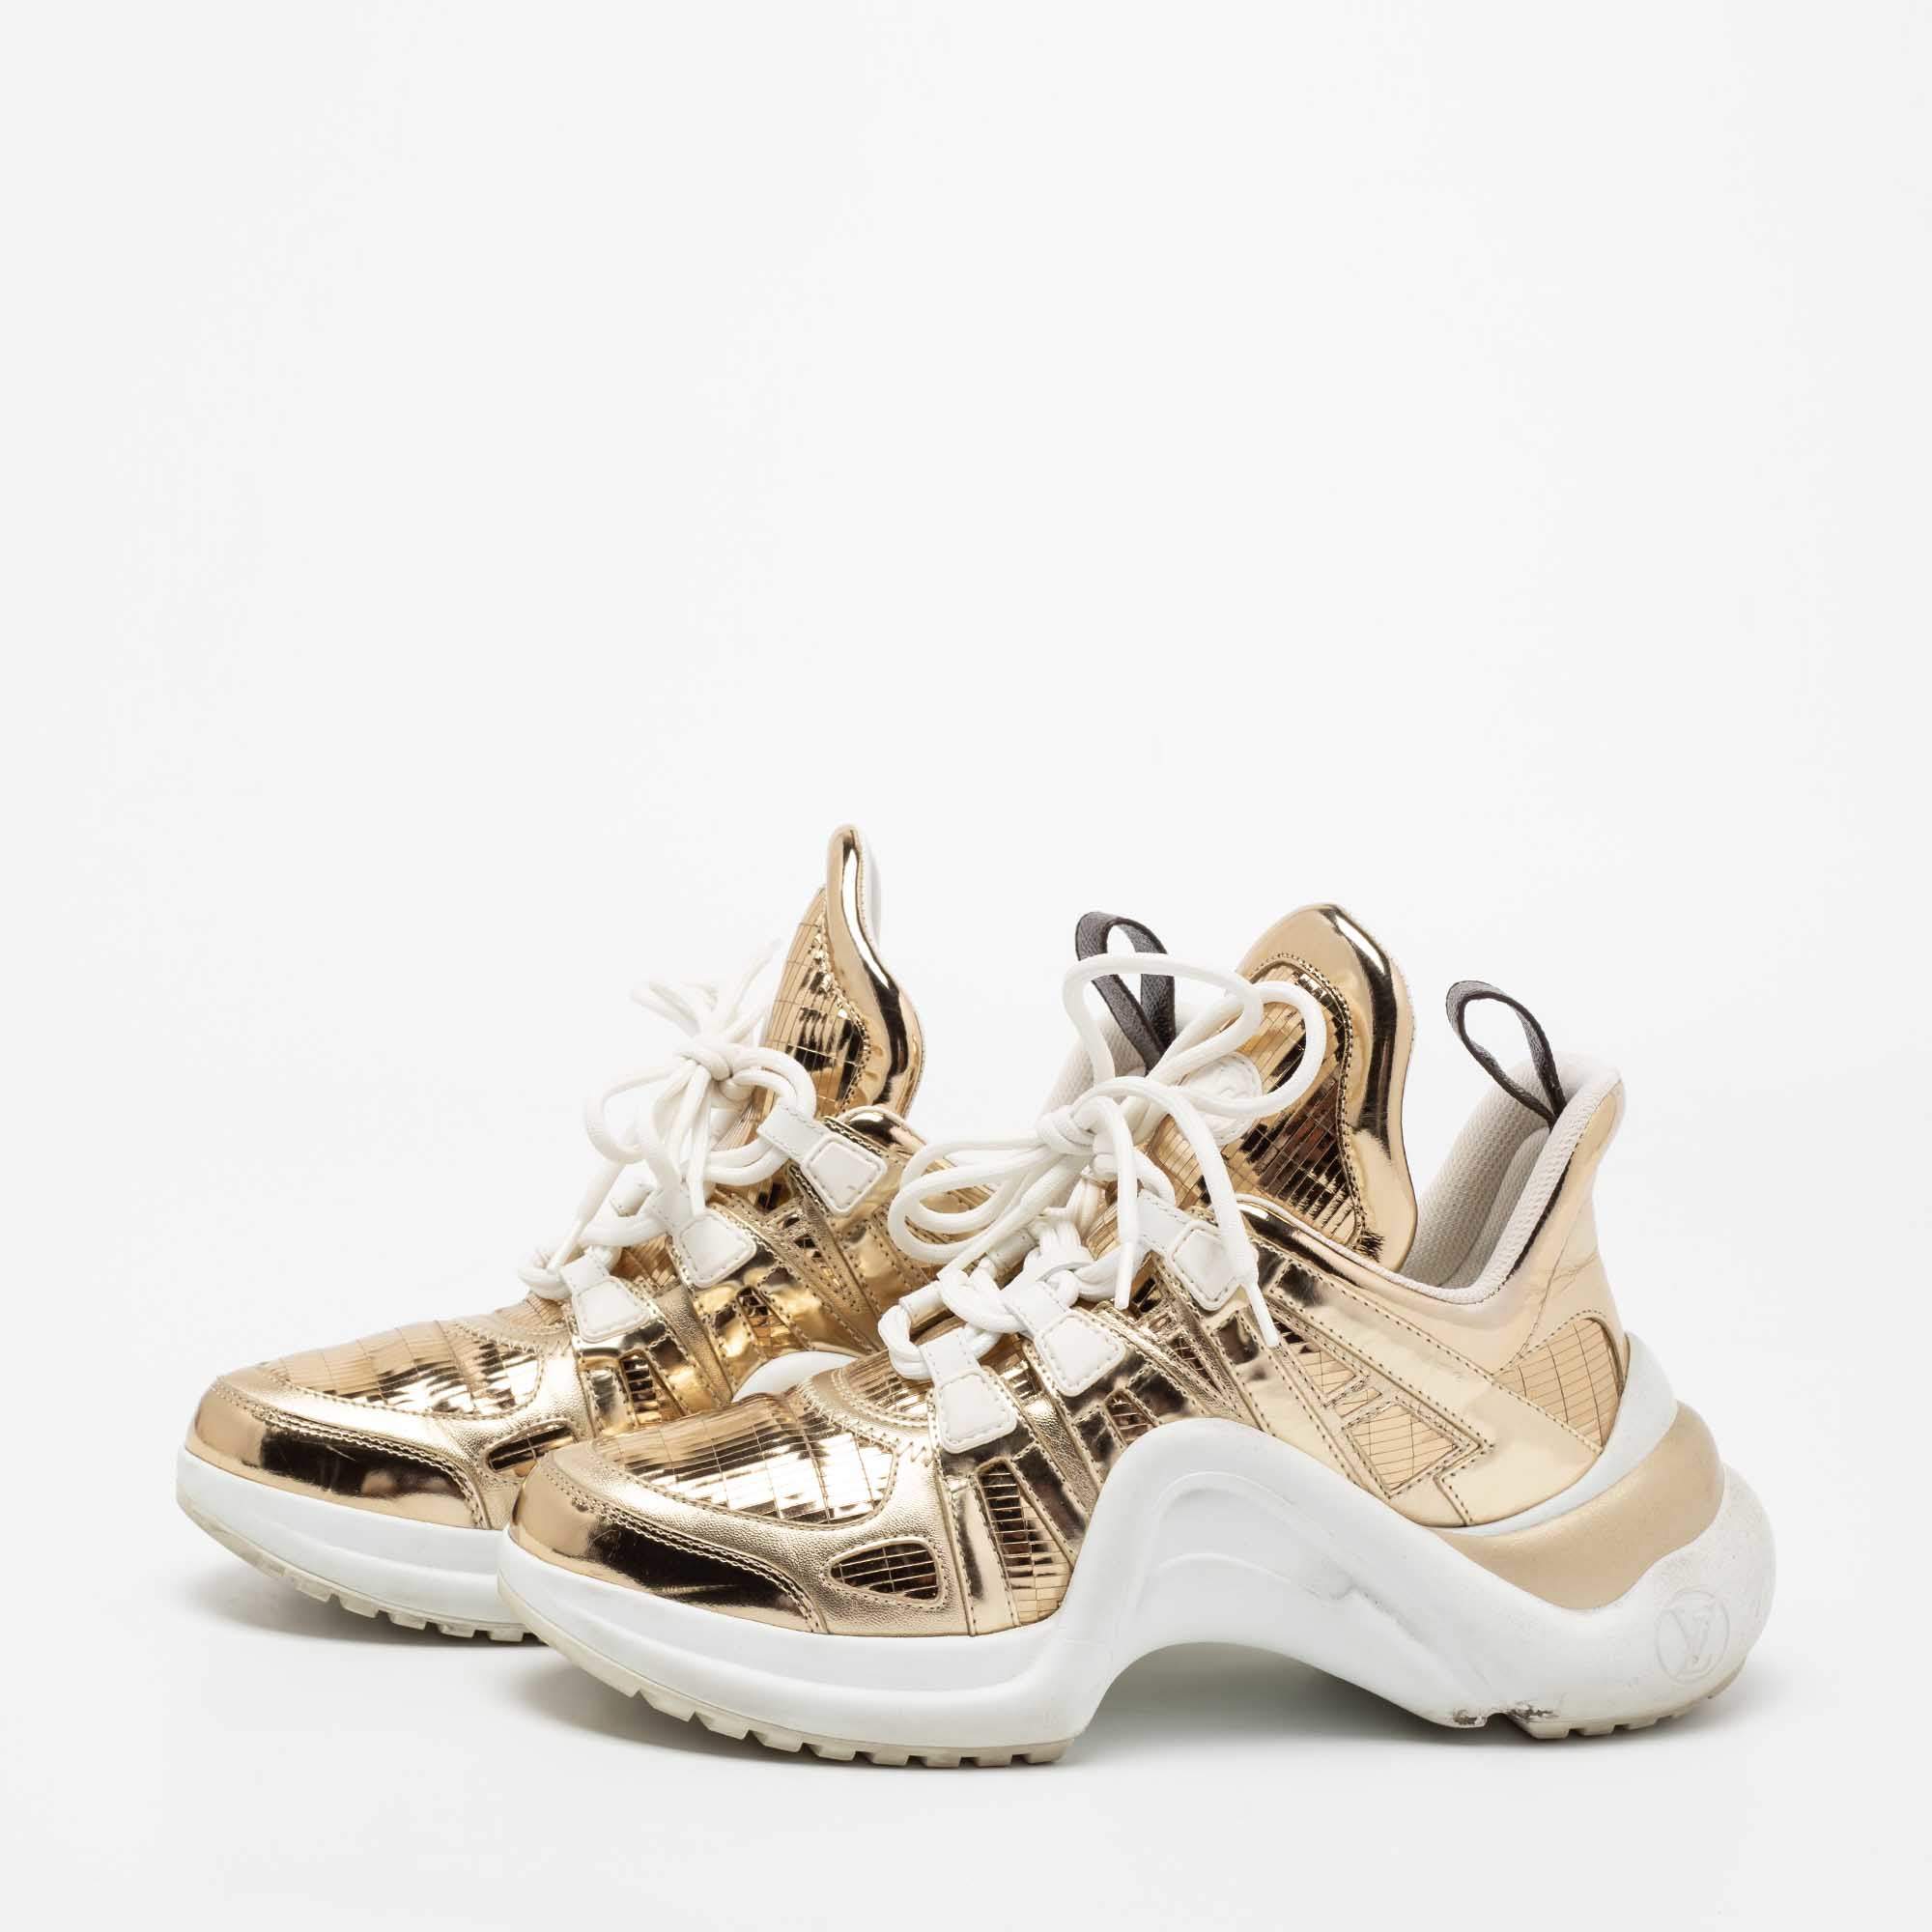 LV Archlight Trainers - Luxury Gold